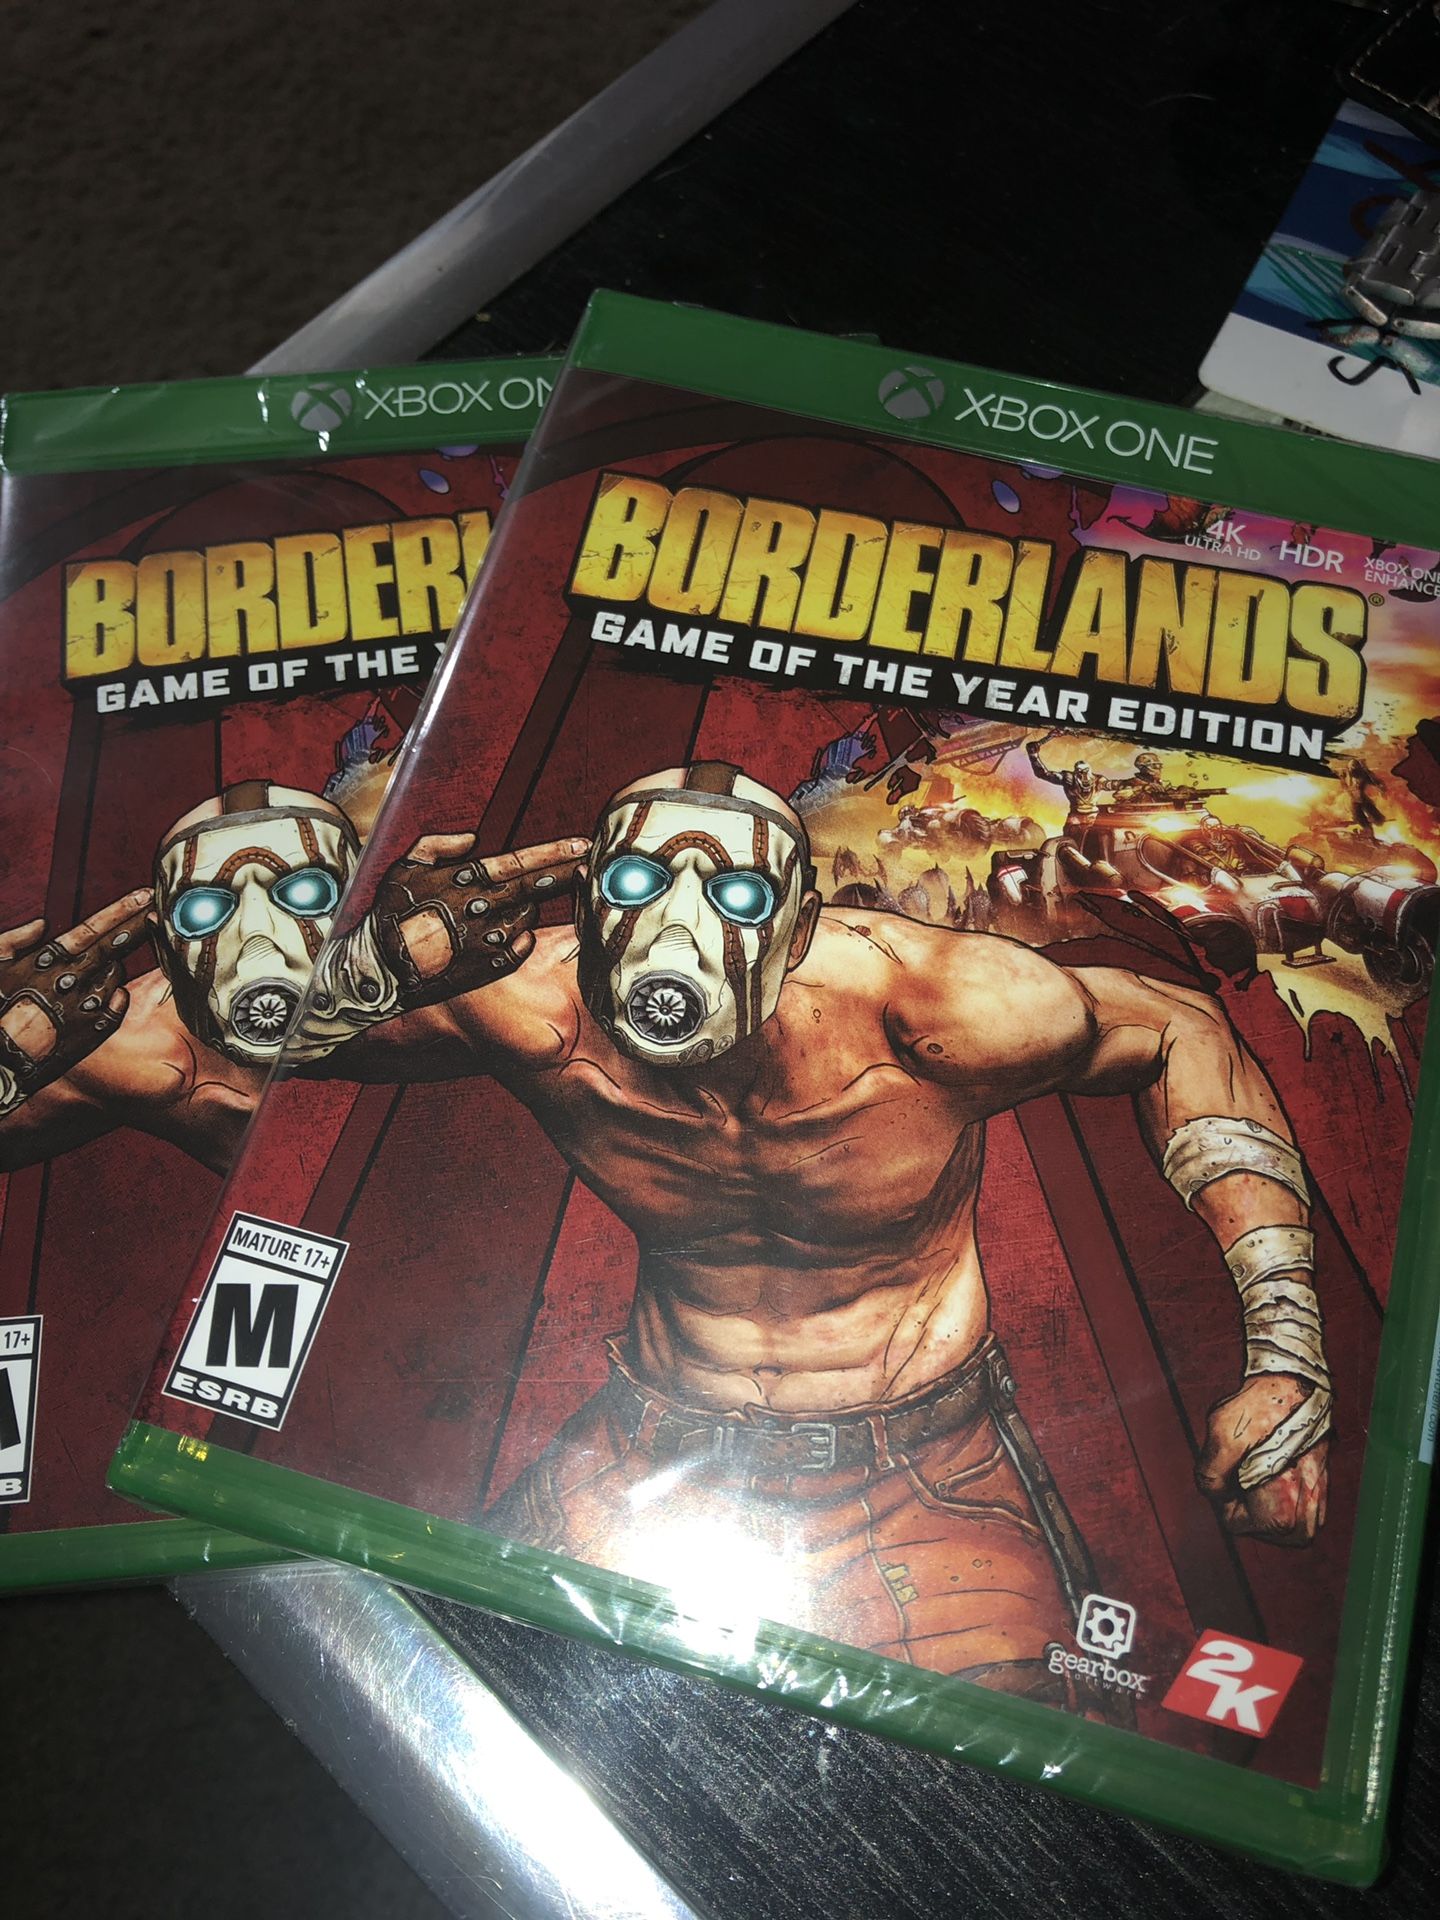 Borderlands game of the year edition true 4k Xbox one x